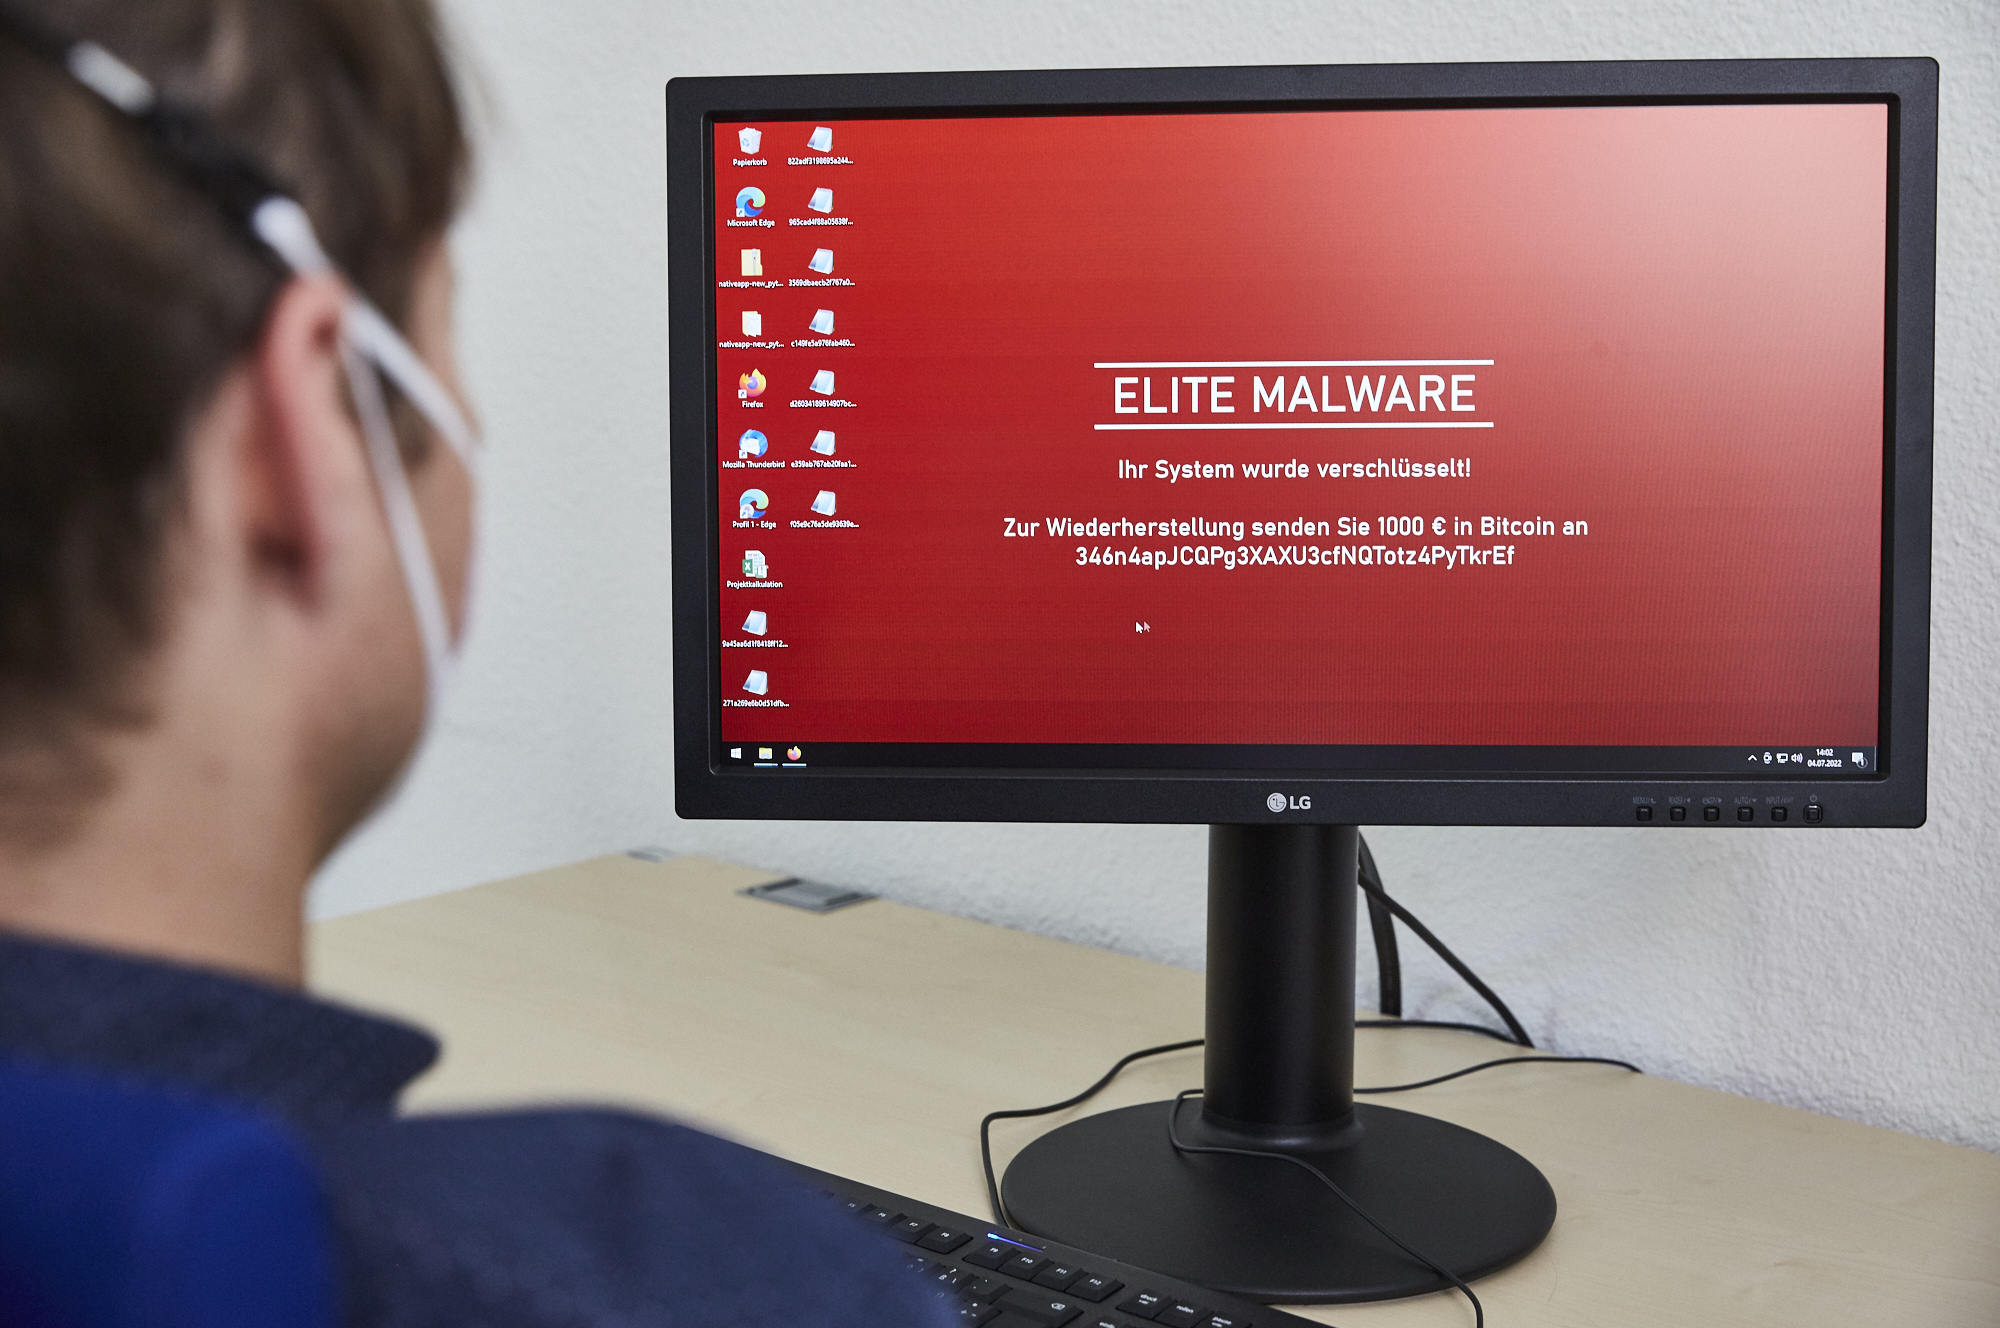 A man looks at a computer screen that shows a red desktop background with an extortion message.